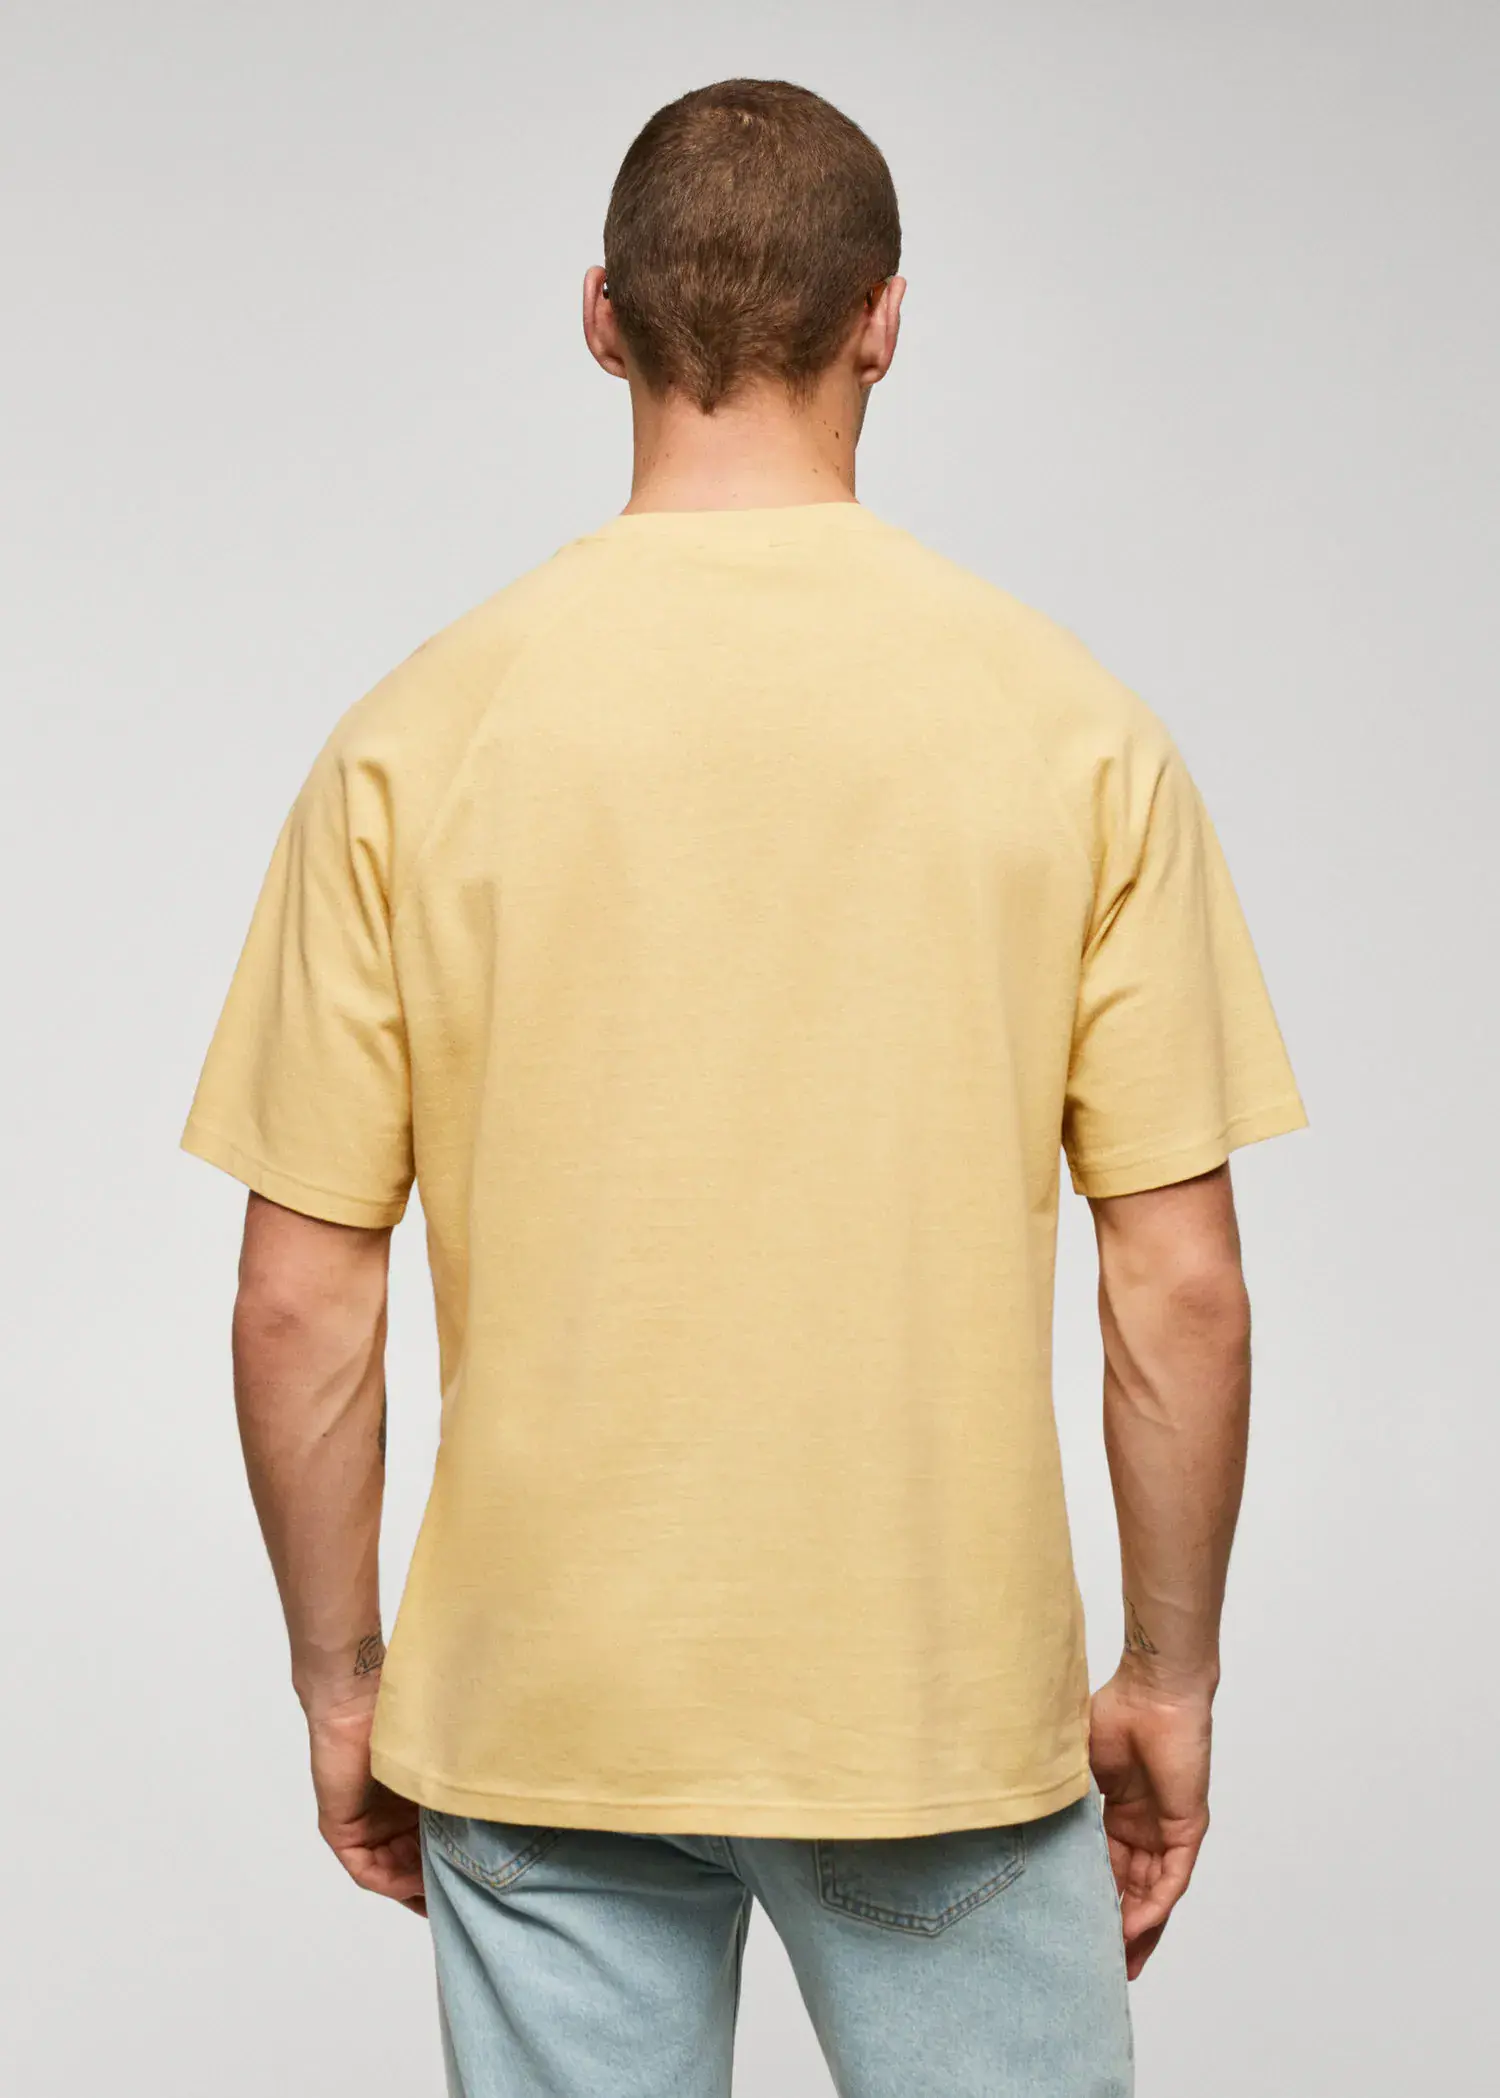 Mango Textured cotton-linen t-shirt. a man in a yellow shirt standing in front of a white wall. 